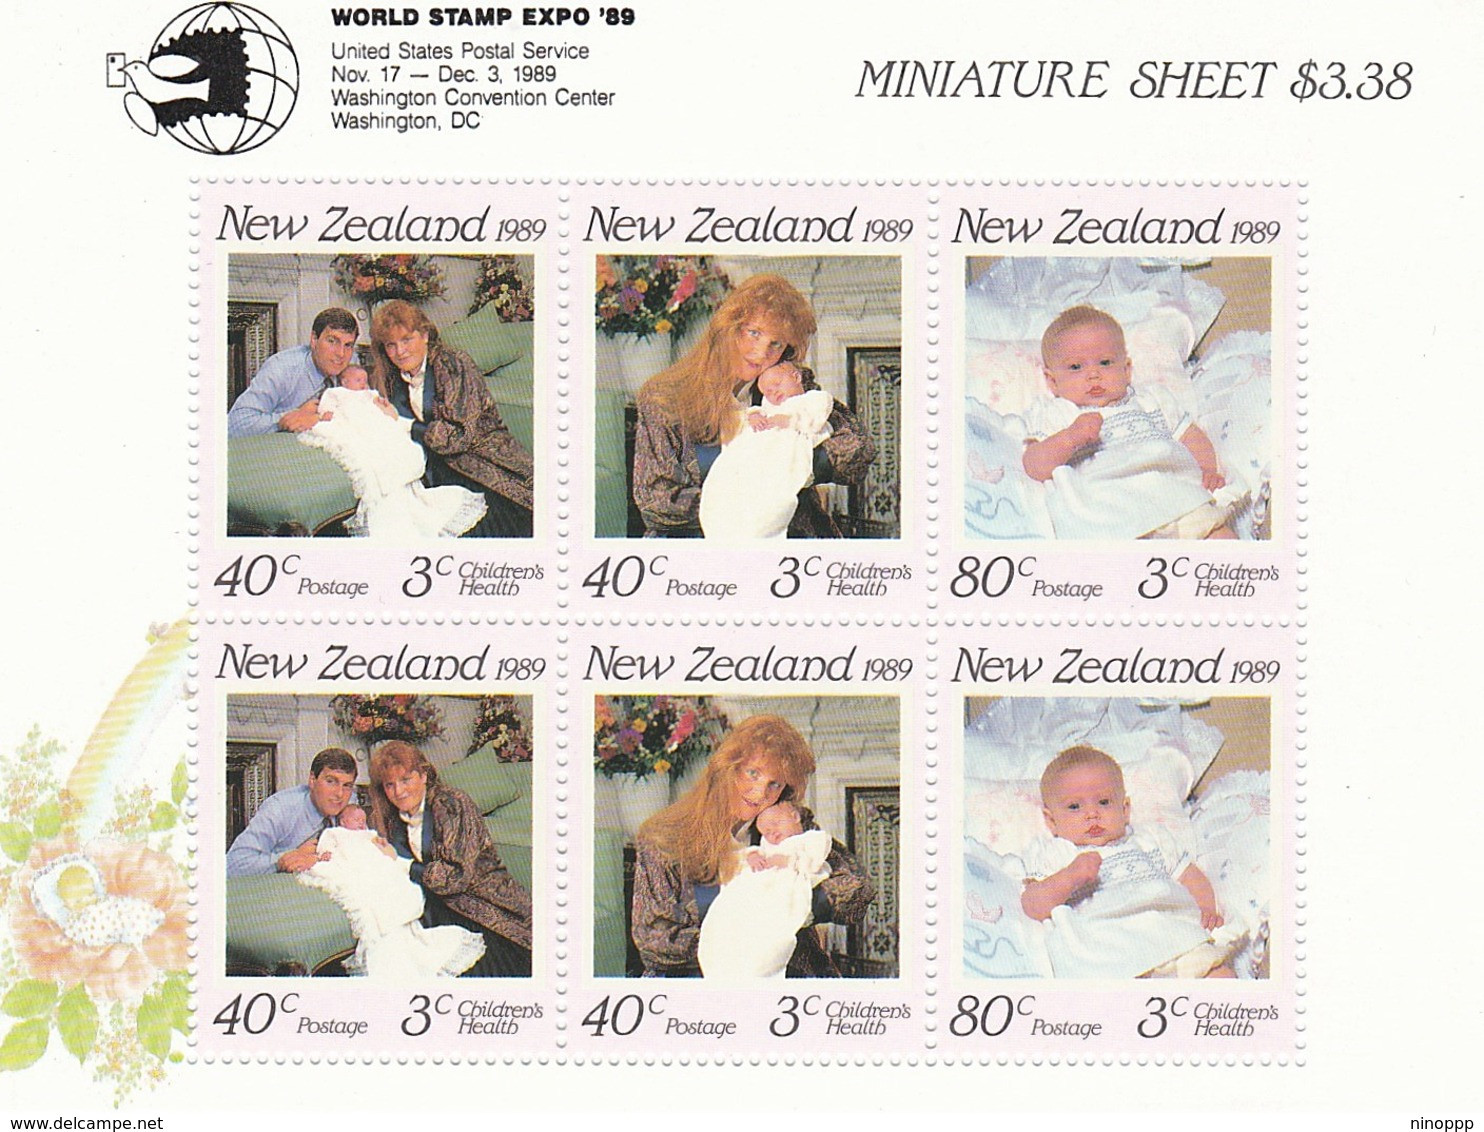 New Zealand SG MS 1519a 1989 Royal Family Health, Miniature Sheet,Overprinted World Expo'89, Mint Never Hinged - Unused Stamps